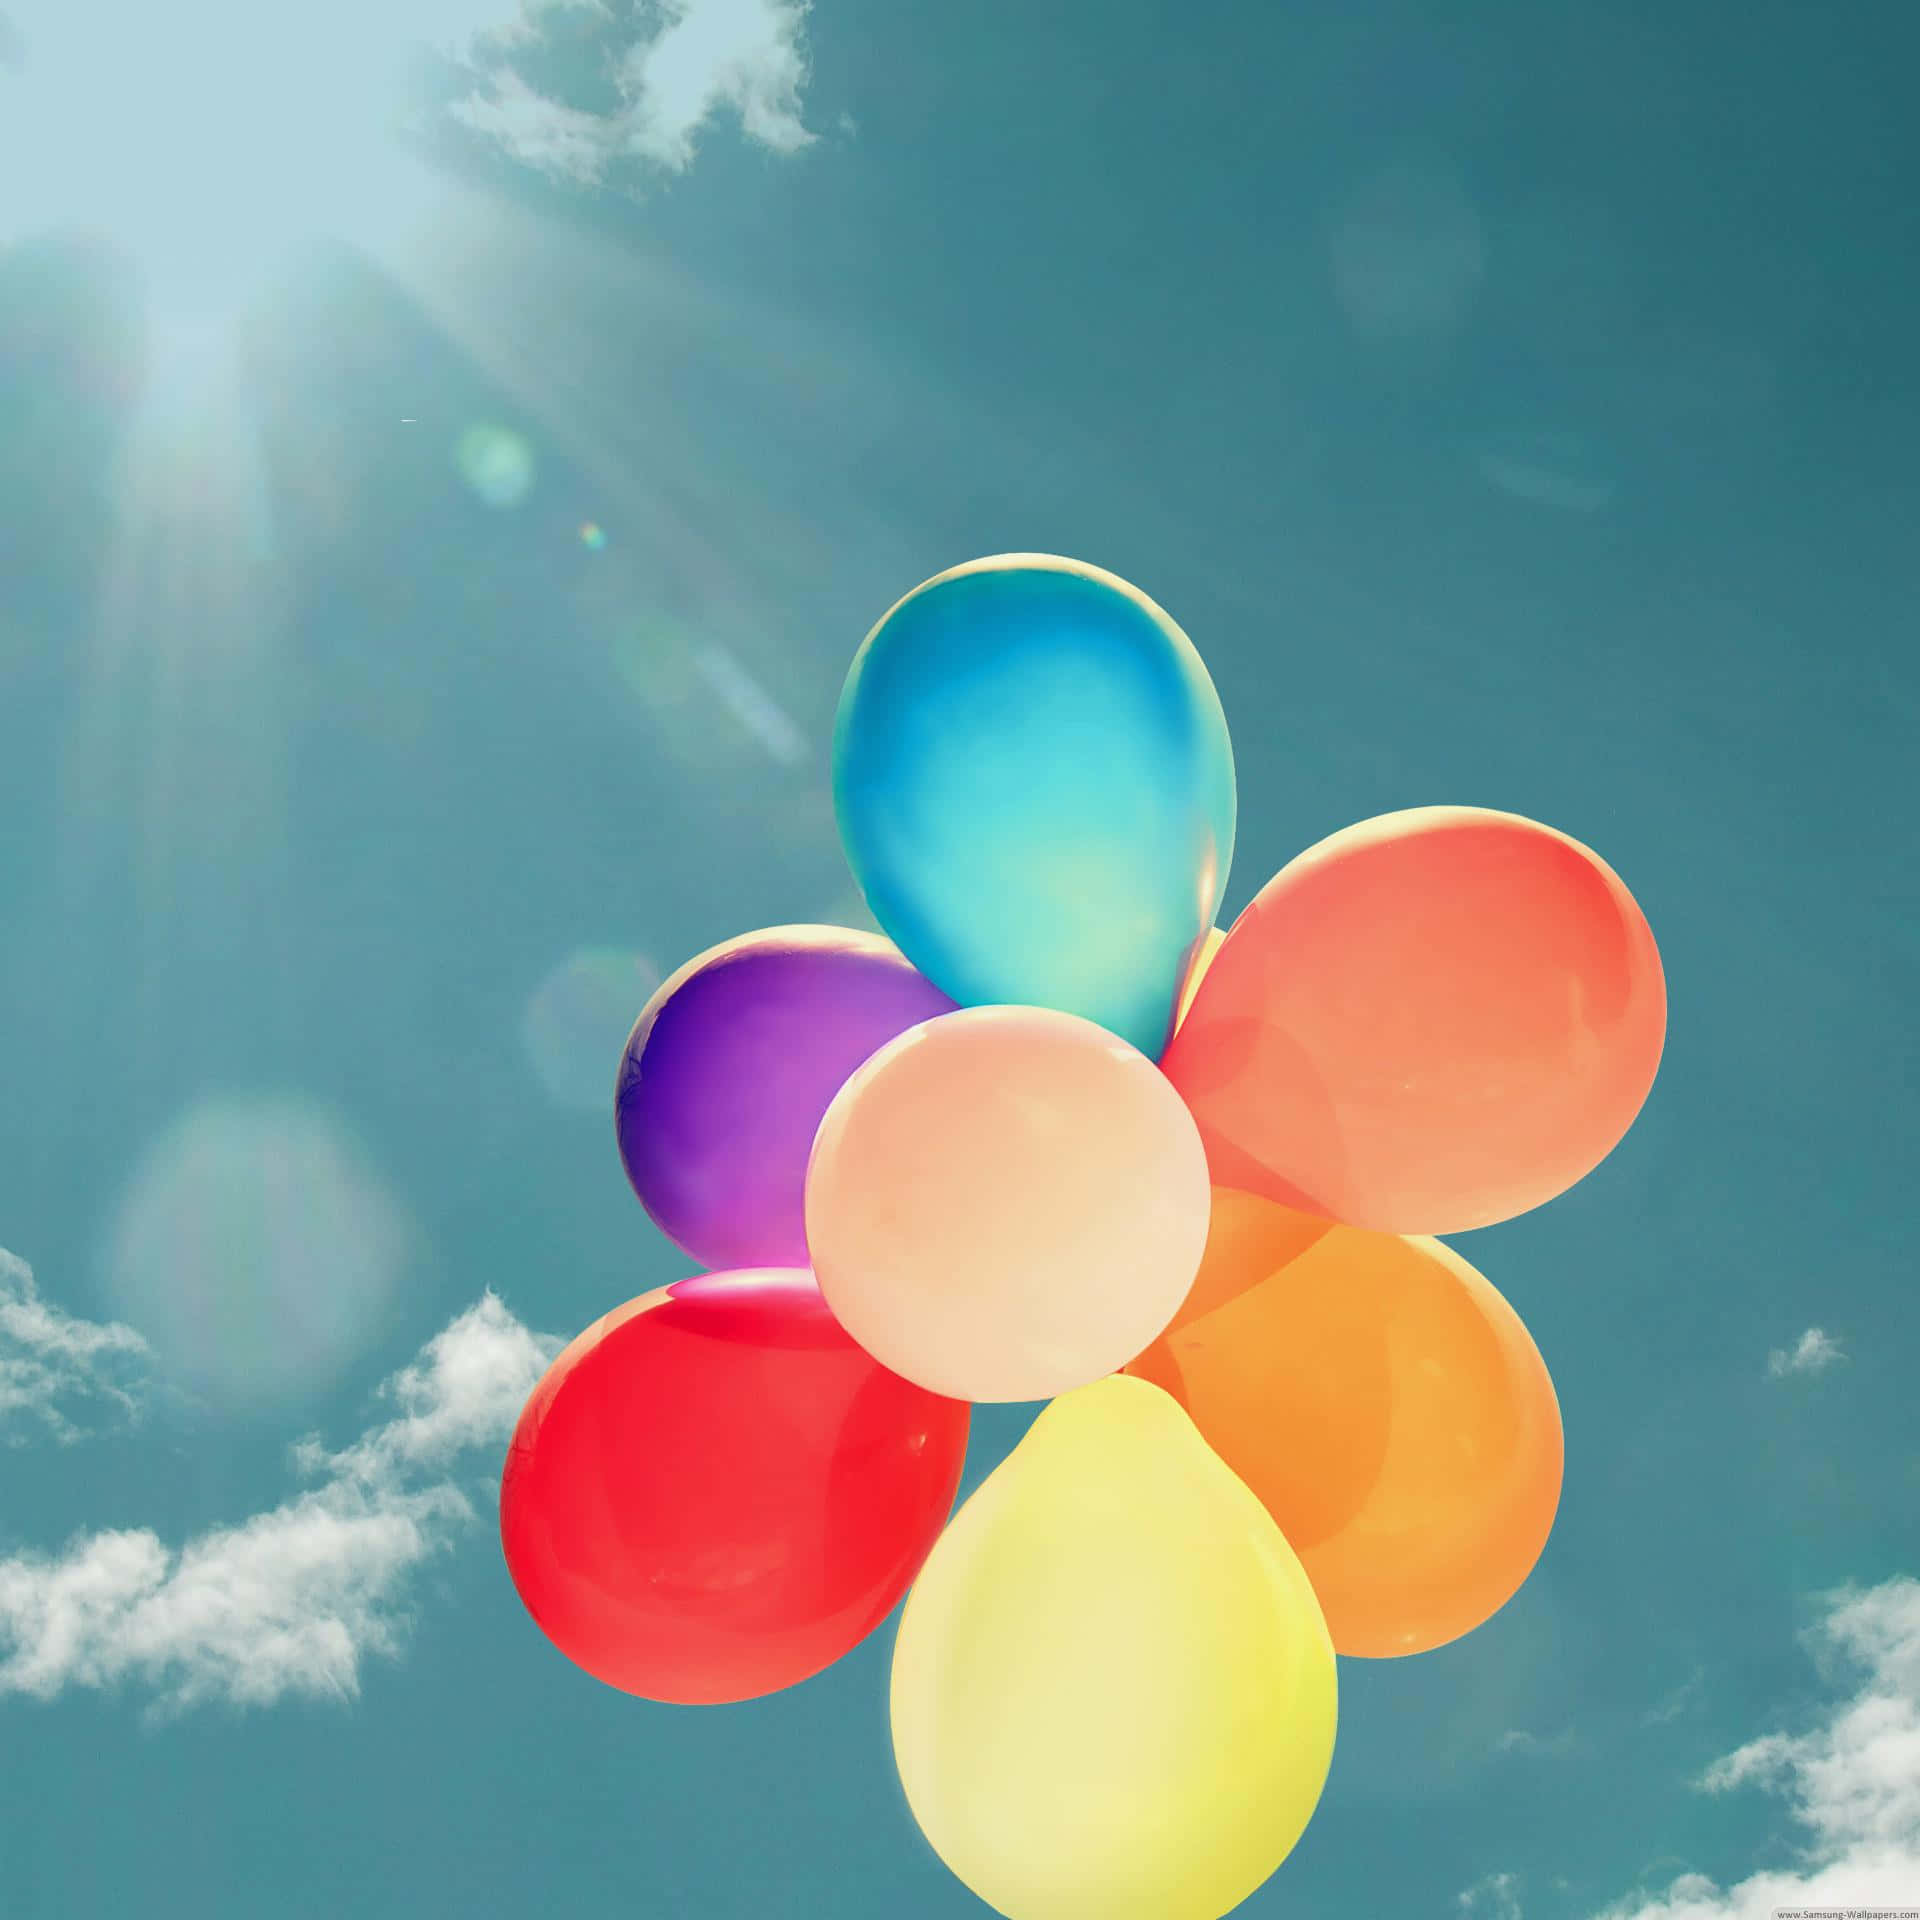 Colorful balloons fill the summer sky!